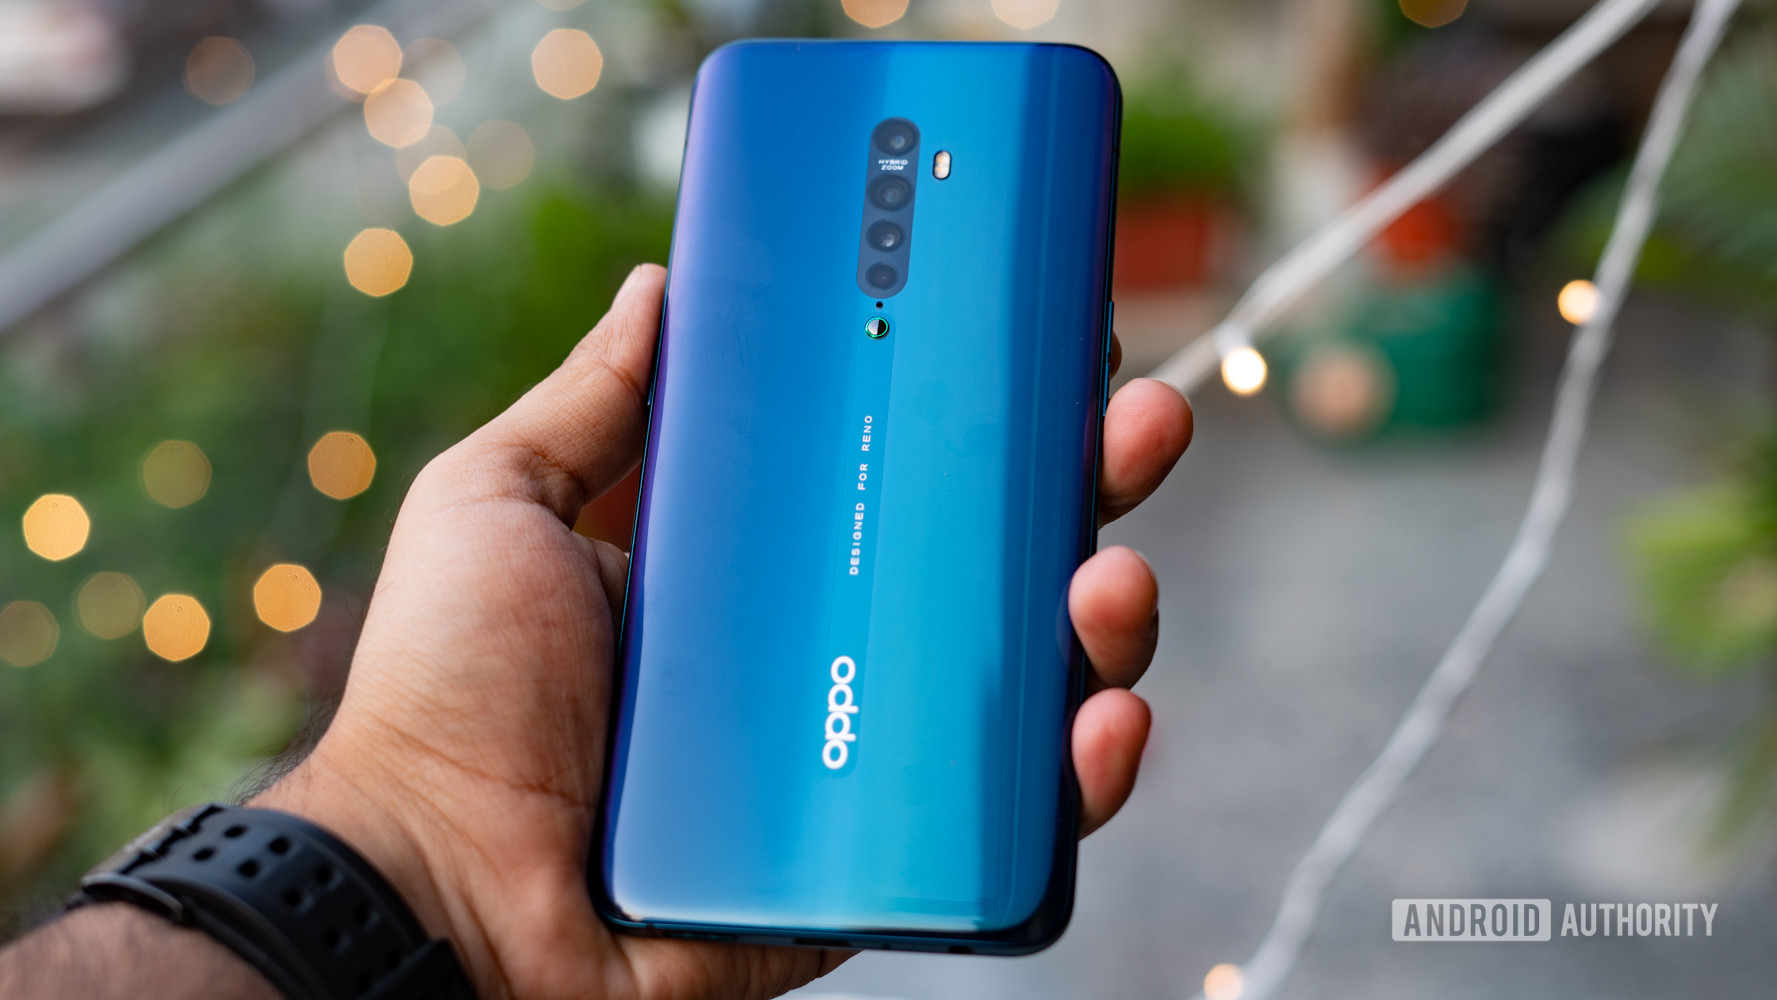 OPPO Reno 2 rear panel in hand